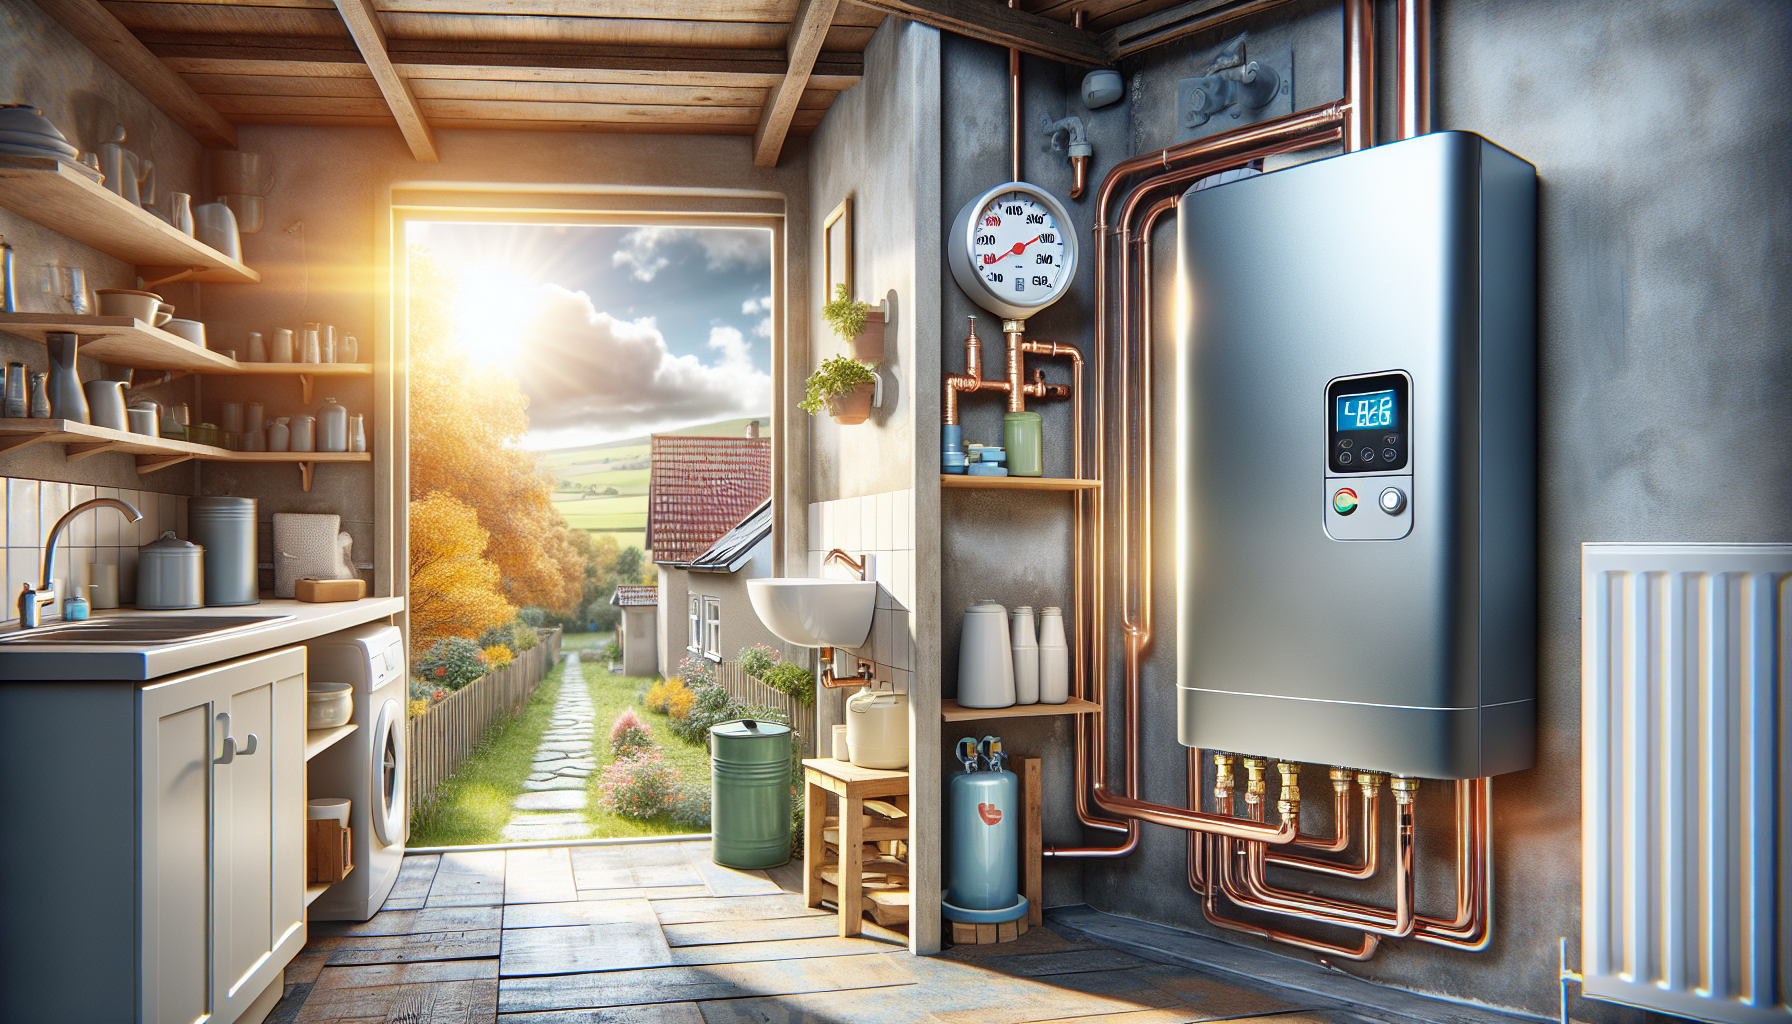 Upgrading to a modern gas hot water system